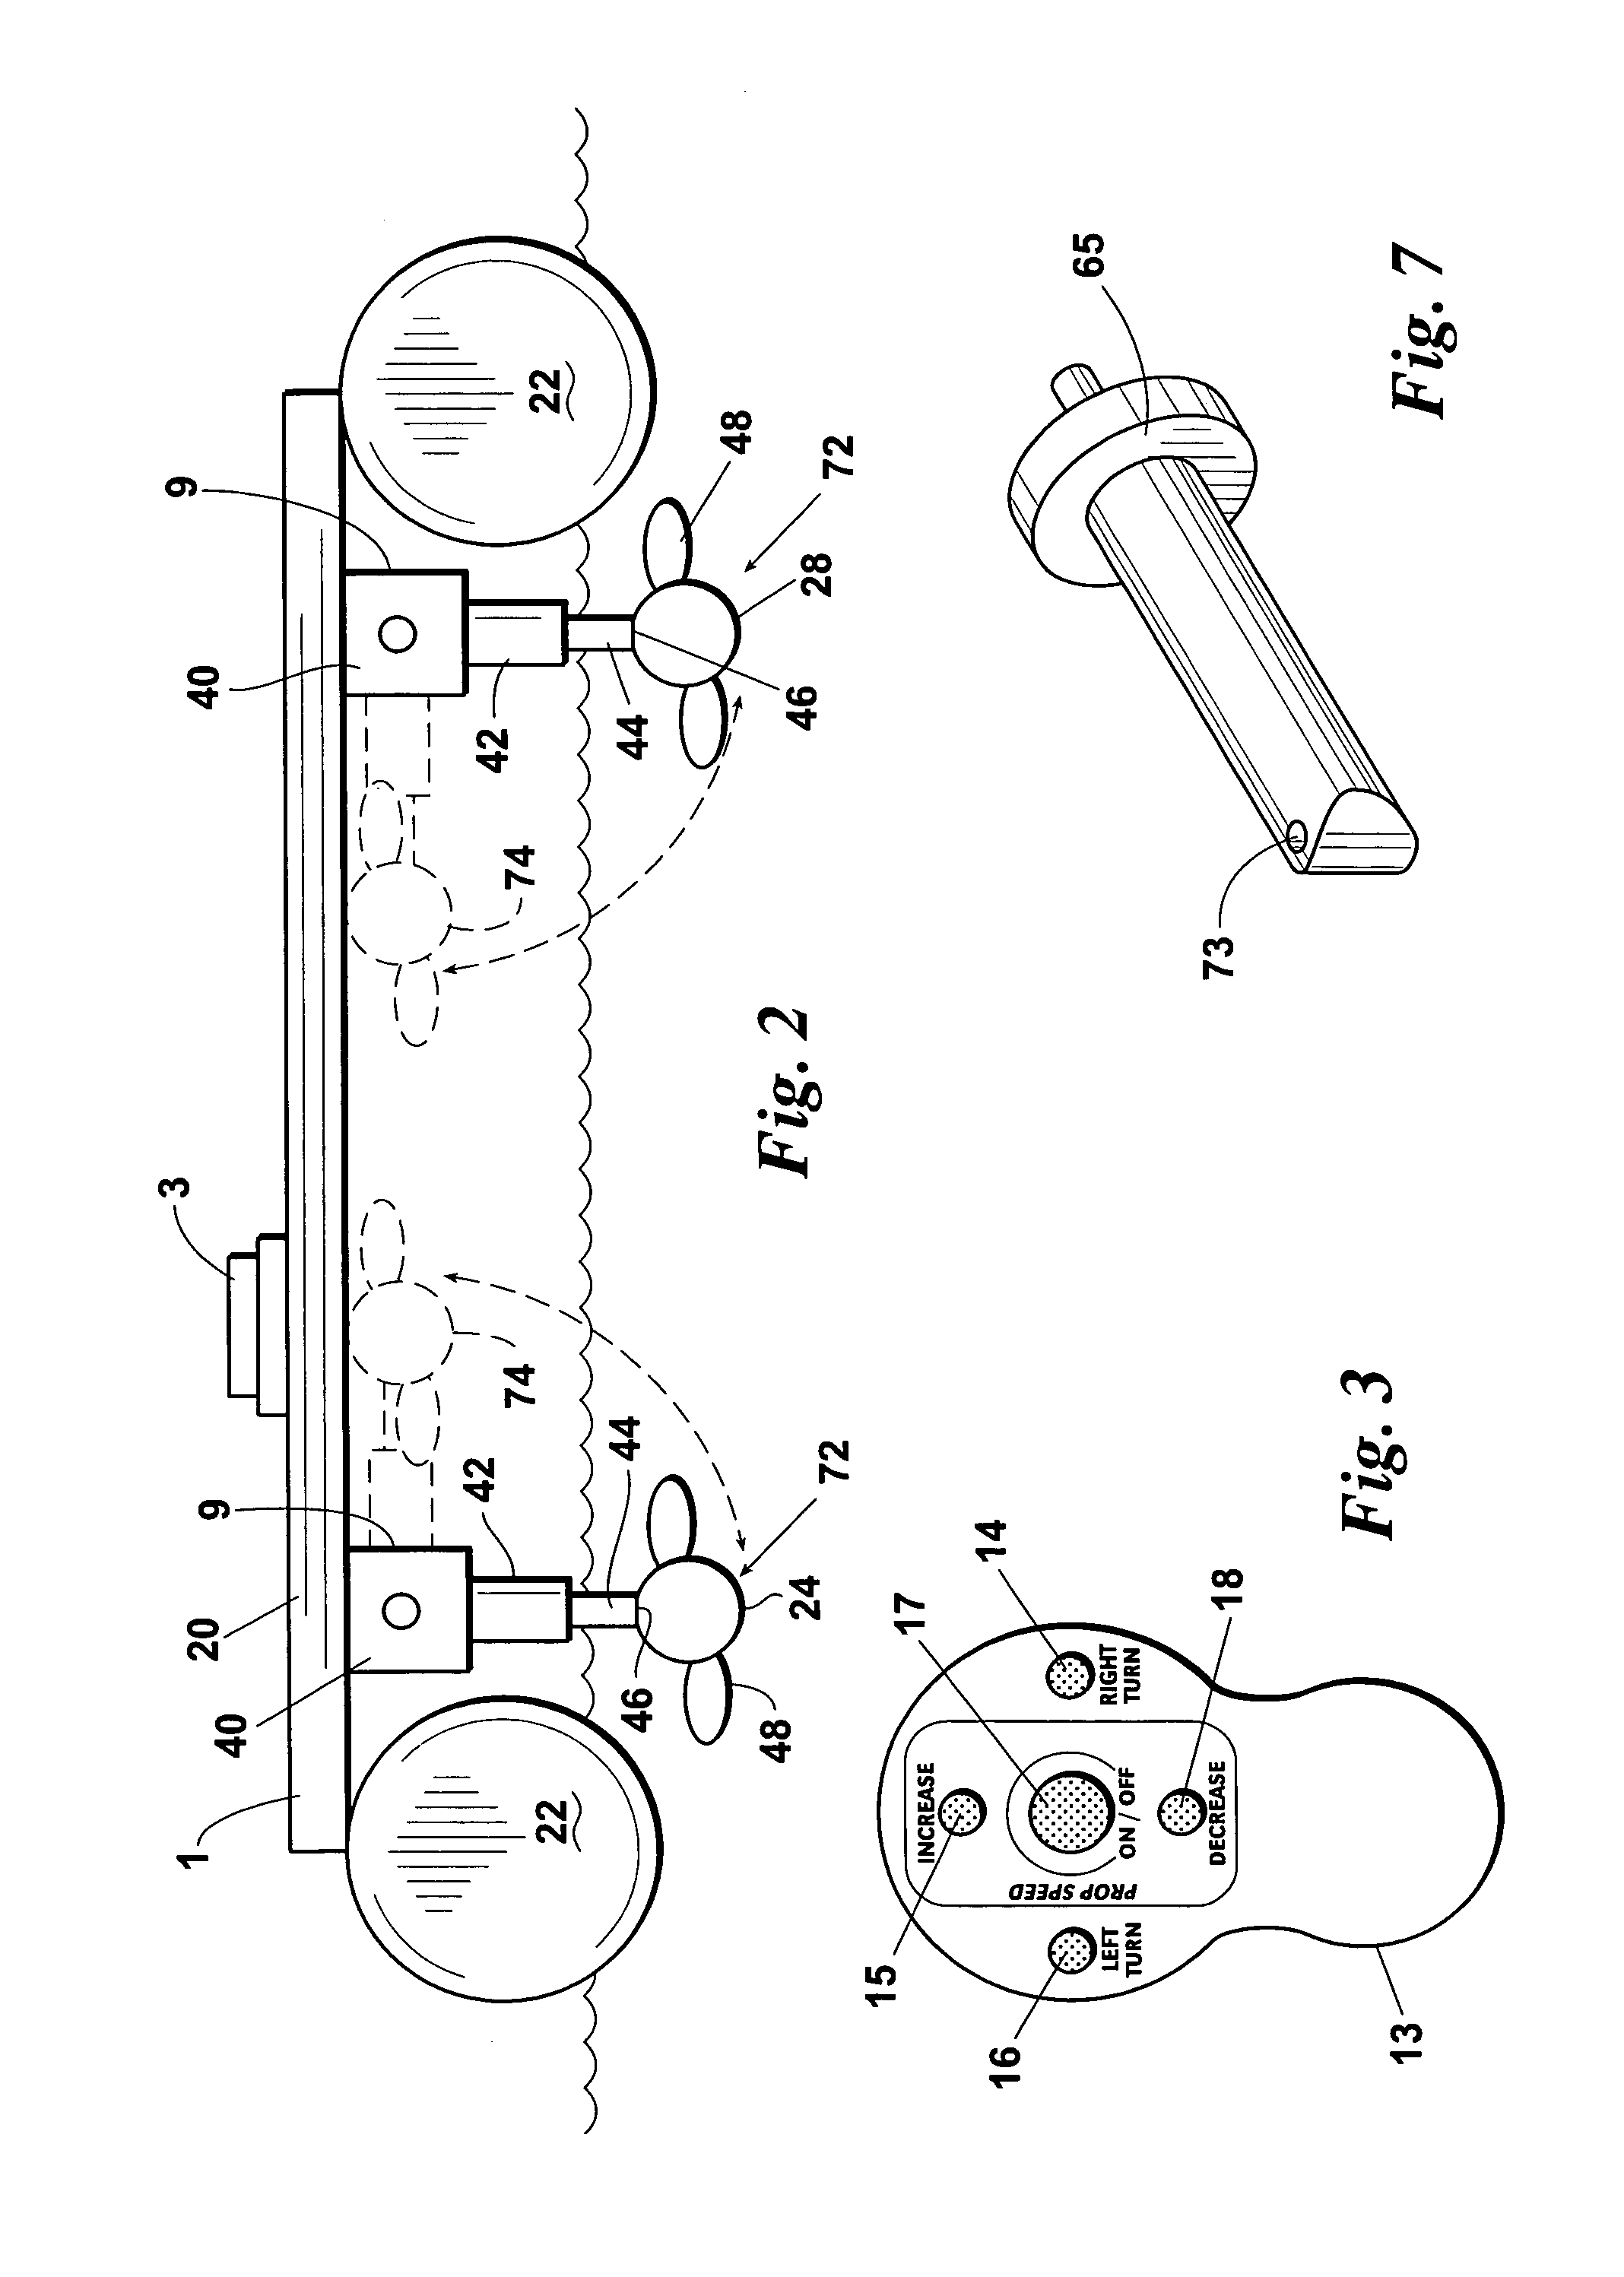 Watercraft docking system and propulsion assembly